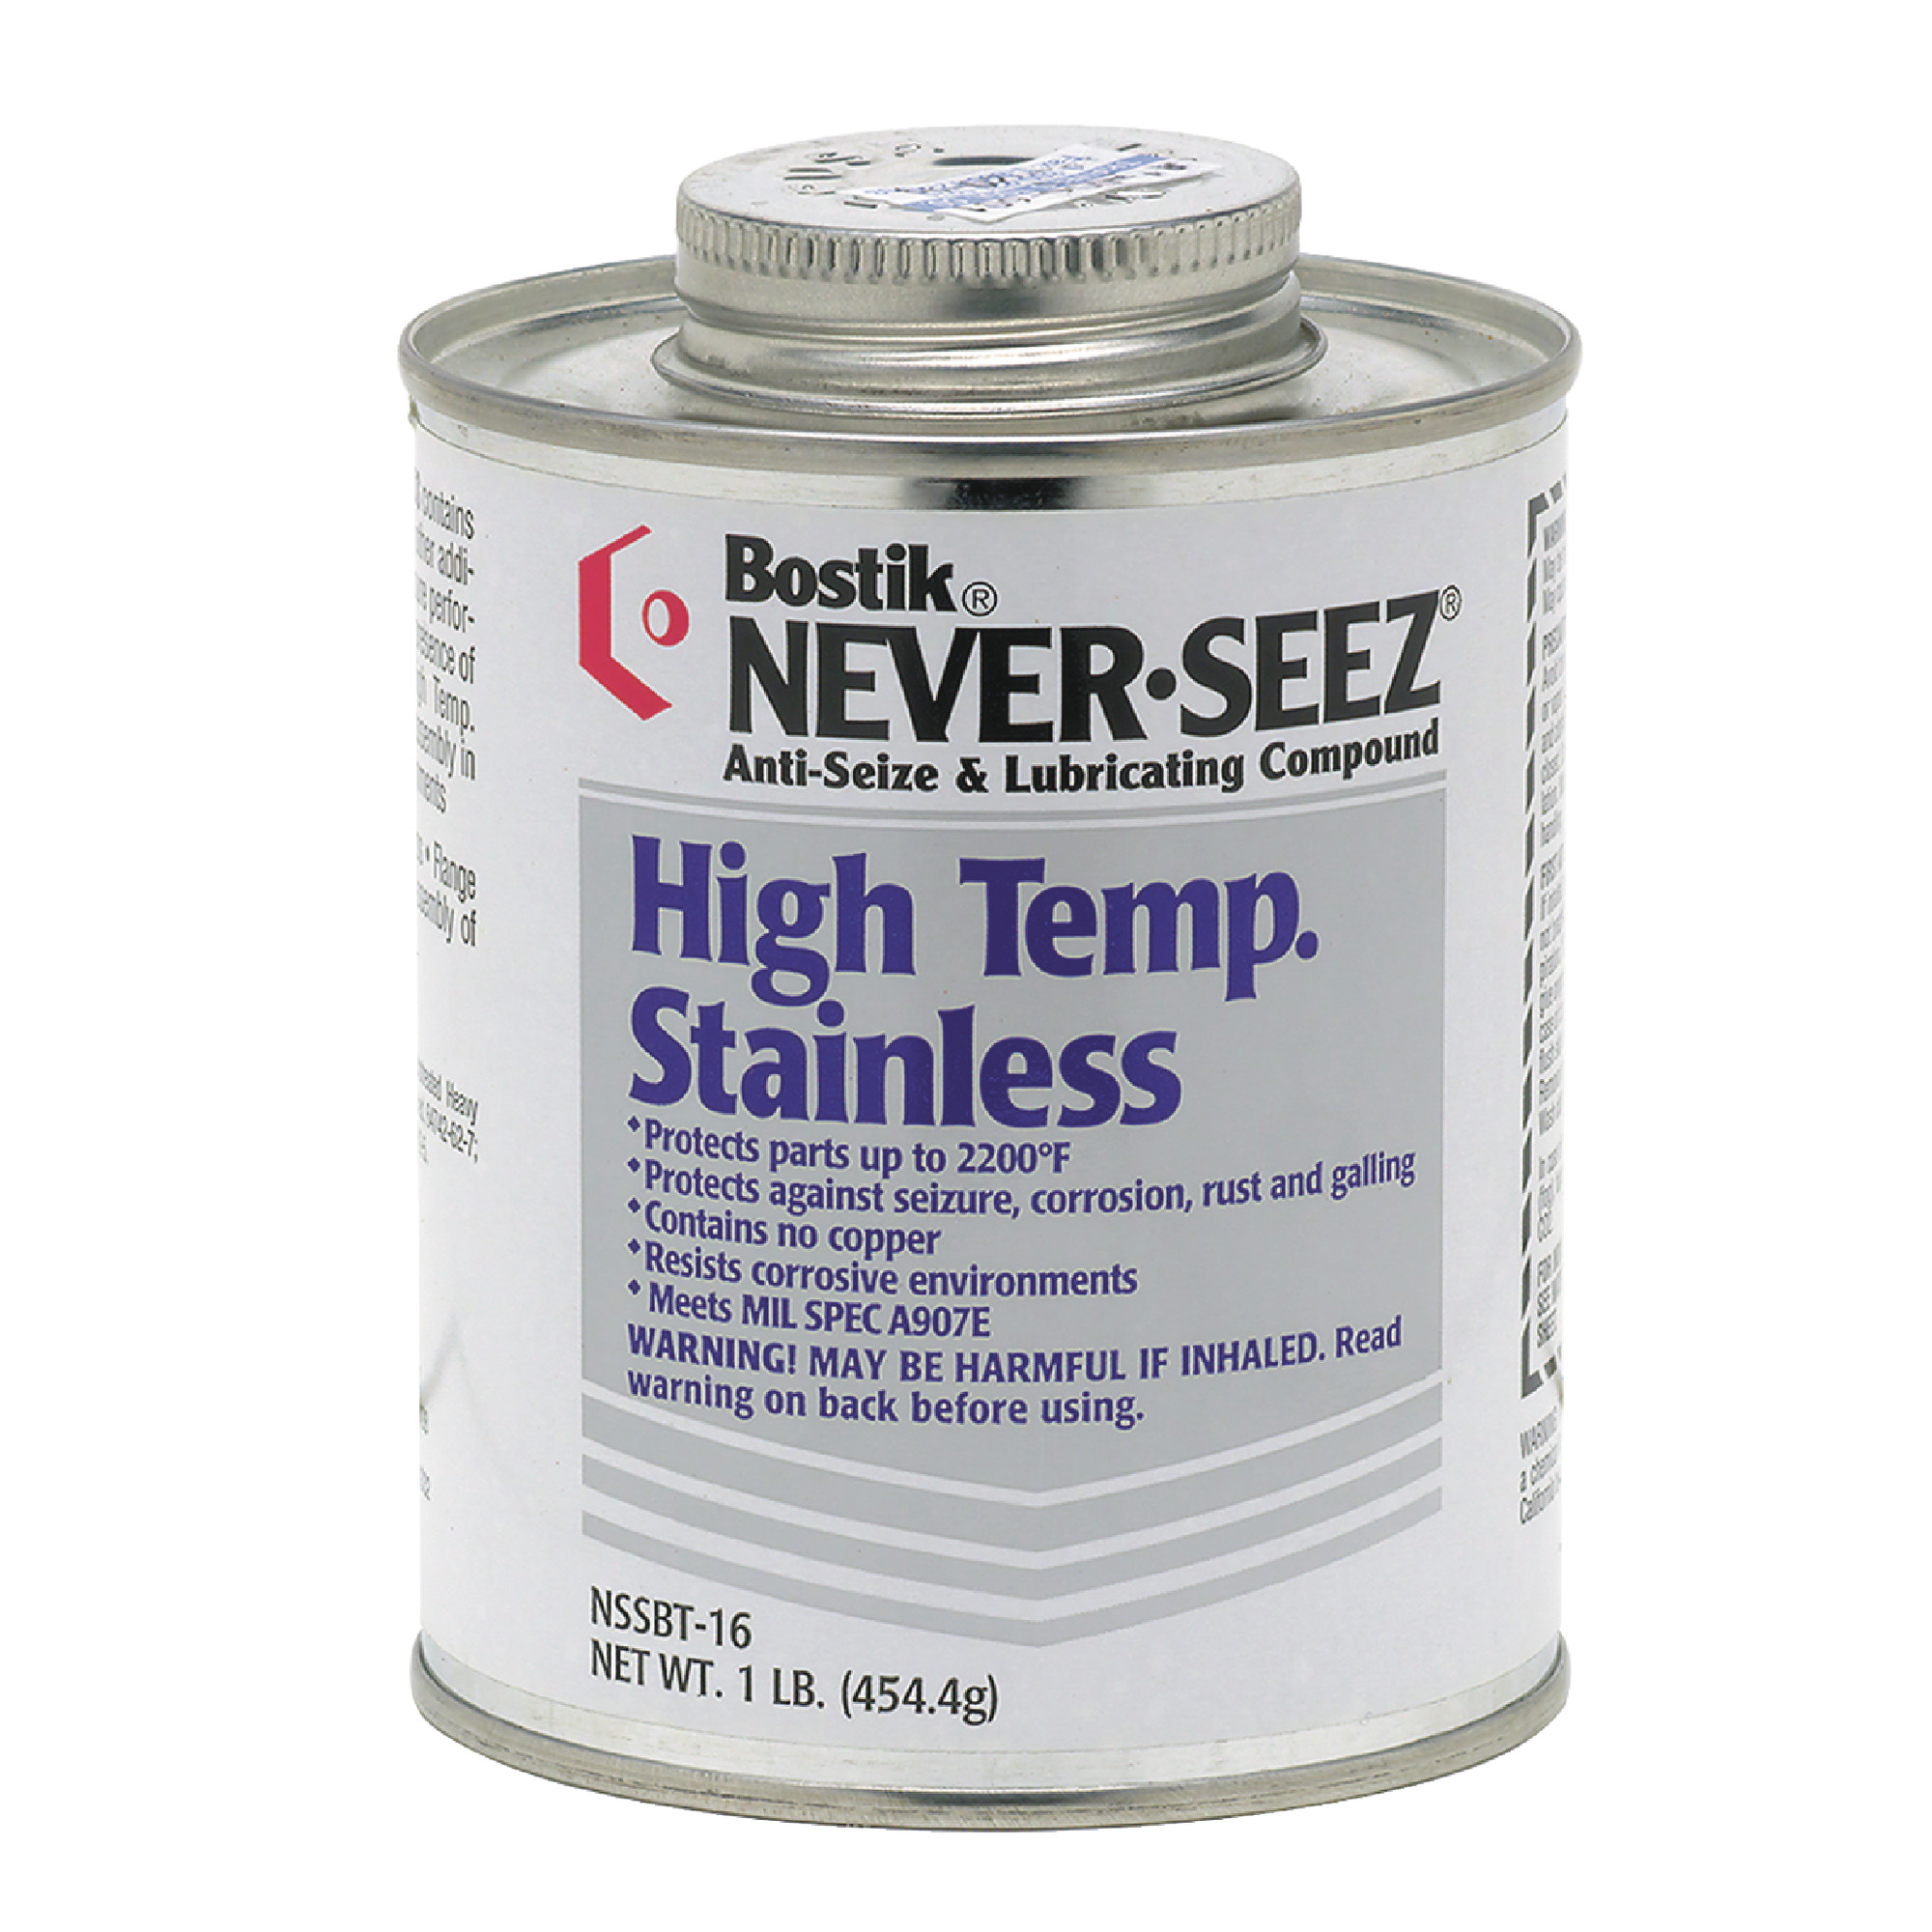 High Temperature Stainless Anti-Seize